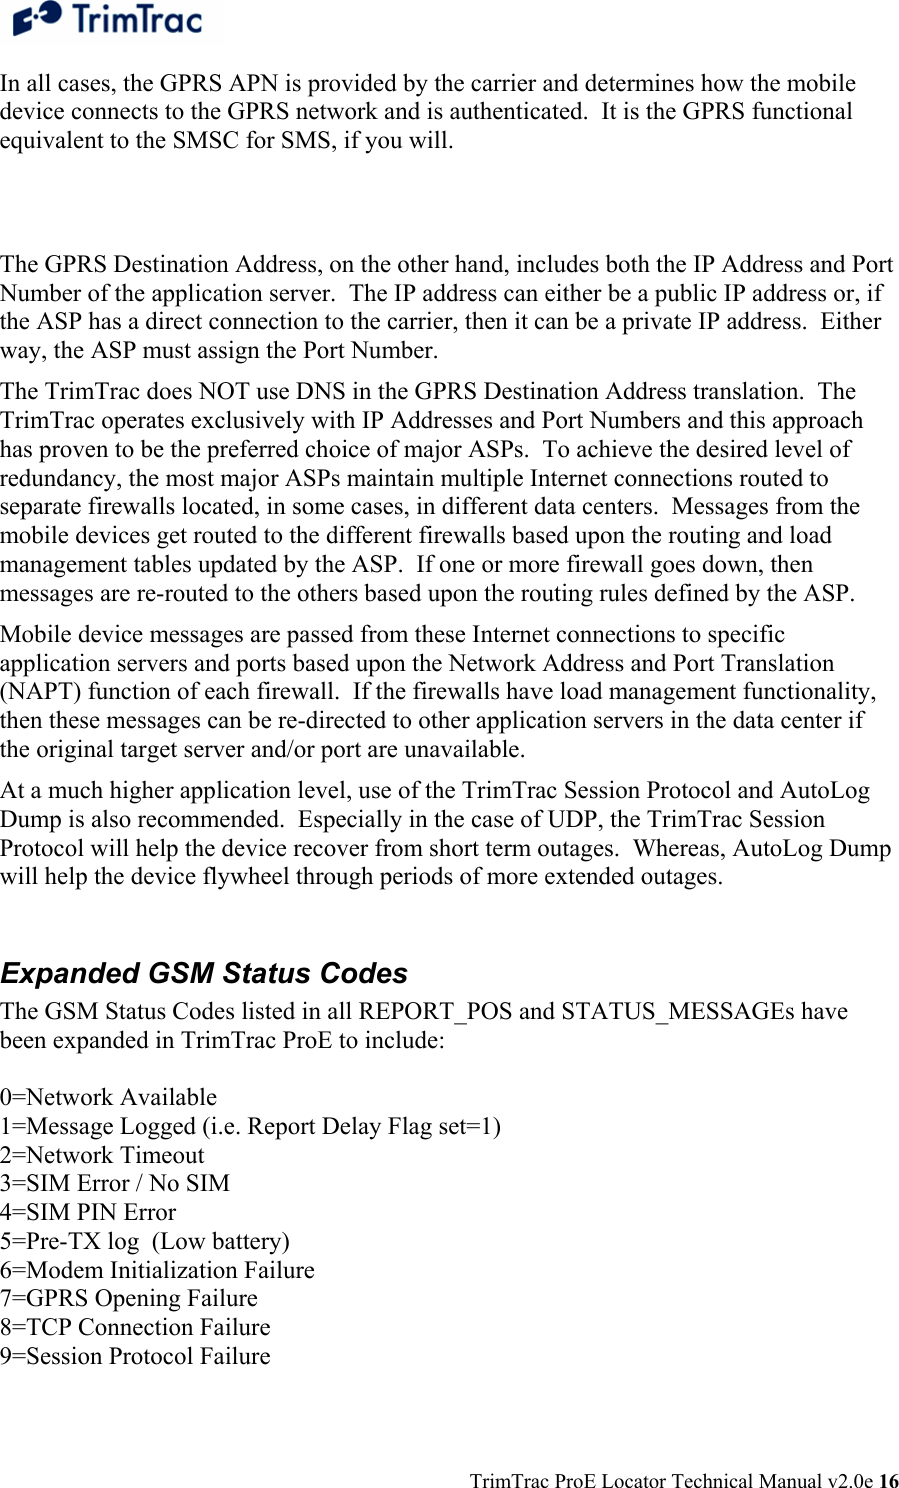  TrimTrac ProE Locator Technical Manual v2.0e 16 In all cases, the GPRS APN is provided by the carrier and determines how the mobile device connects to the GPRS network and is authenticated.  It is the GPRS functional equivalent to the SMSC for SMS, if you will.    The GPRS Destination Address, on the other hand, includes both the IP Address and Port Number of the application server.  The IP address can either be a public IP address or, if the ASP has a direct connection to the carrier, then it can be a private IP address.  Either way, the ASP must assign the Port Number. The TrimTrac does NOT use DNS in the GPRS Destination Address translation.  The TrimTrac operates exclusively with IP Addresses and Port Numbers and this approach has proven to be the preferred choice of major ASPs.  To achieve the desired level of redundancy, the most major ASPs maintain multiple Internet connections routed to separate firewalls located, in some cases, in different data centers.  Messages from the mobile devices get routed to the different firewalls based upon the routing and load management tables updated by the ASP.  If one or more firewall goes down, then messages are re-routed to the others based upon the routing rules defined by the ASP. Mobile device messages are passed from these Internet connections to specific application servers and ports based upon the Network Address and Port Translation (NAPT) function of each firewall.  If the firewalls have load management functionality, then these messages can be re-directed to other application servers in the data center if the original target server and/or port are unavailable. At a much higher application level, use of the TrimTrac Session Protocol and AutoLog Dump is also recommended.  Especially in the case of UDP, the TrimTrac Session Protocol will help the device recover from short term outages.  Whereas, AutoLog Dump will help the device flywheel through periods of more extended outages.  Expanded GSM Status Codes The GSM Status Codes listed in all REPORT_POS and STATUS_MESSAGEs have been expanded in TrimTrac ProE to include:  0=Network Available 1=Message Logged (i.e. Report Delay Flag set=1) 2=Network Timeout 3=SIM Error / No SIM 4=SIM PIN Error 5=Pre-TX log  (Low battery) 6=Modem Initialization Failure 7=GPRS Opening Failure 8=TCP Connection Failure 9=Session Protocol Failure 